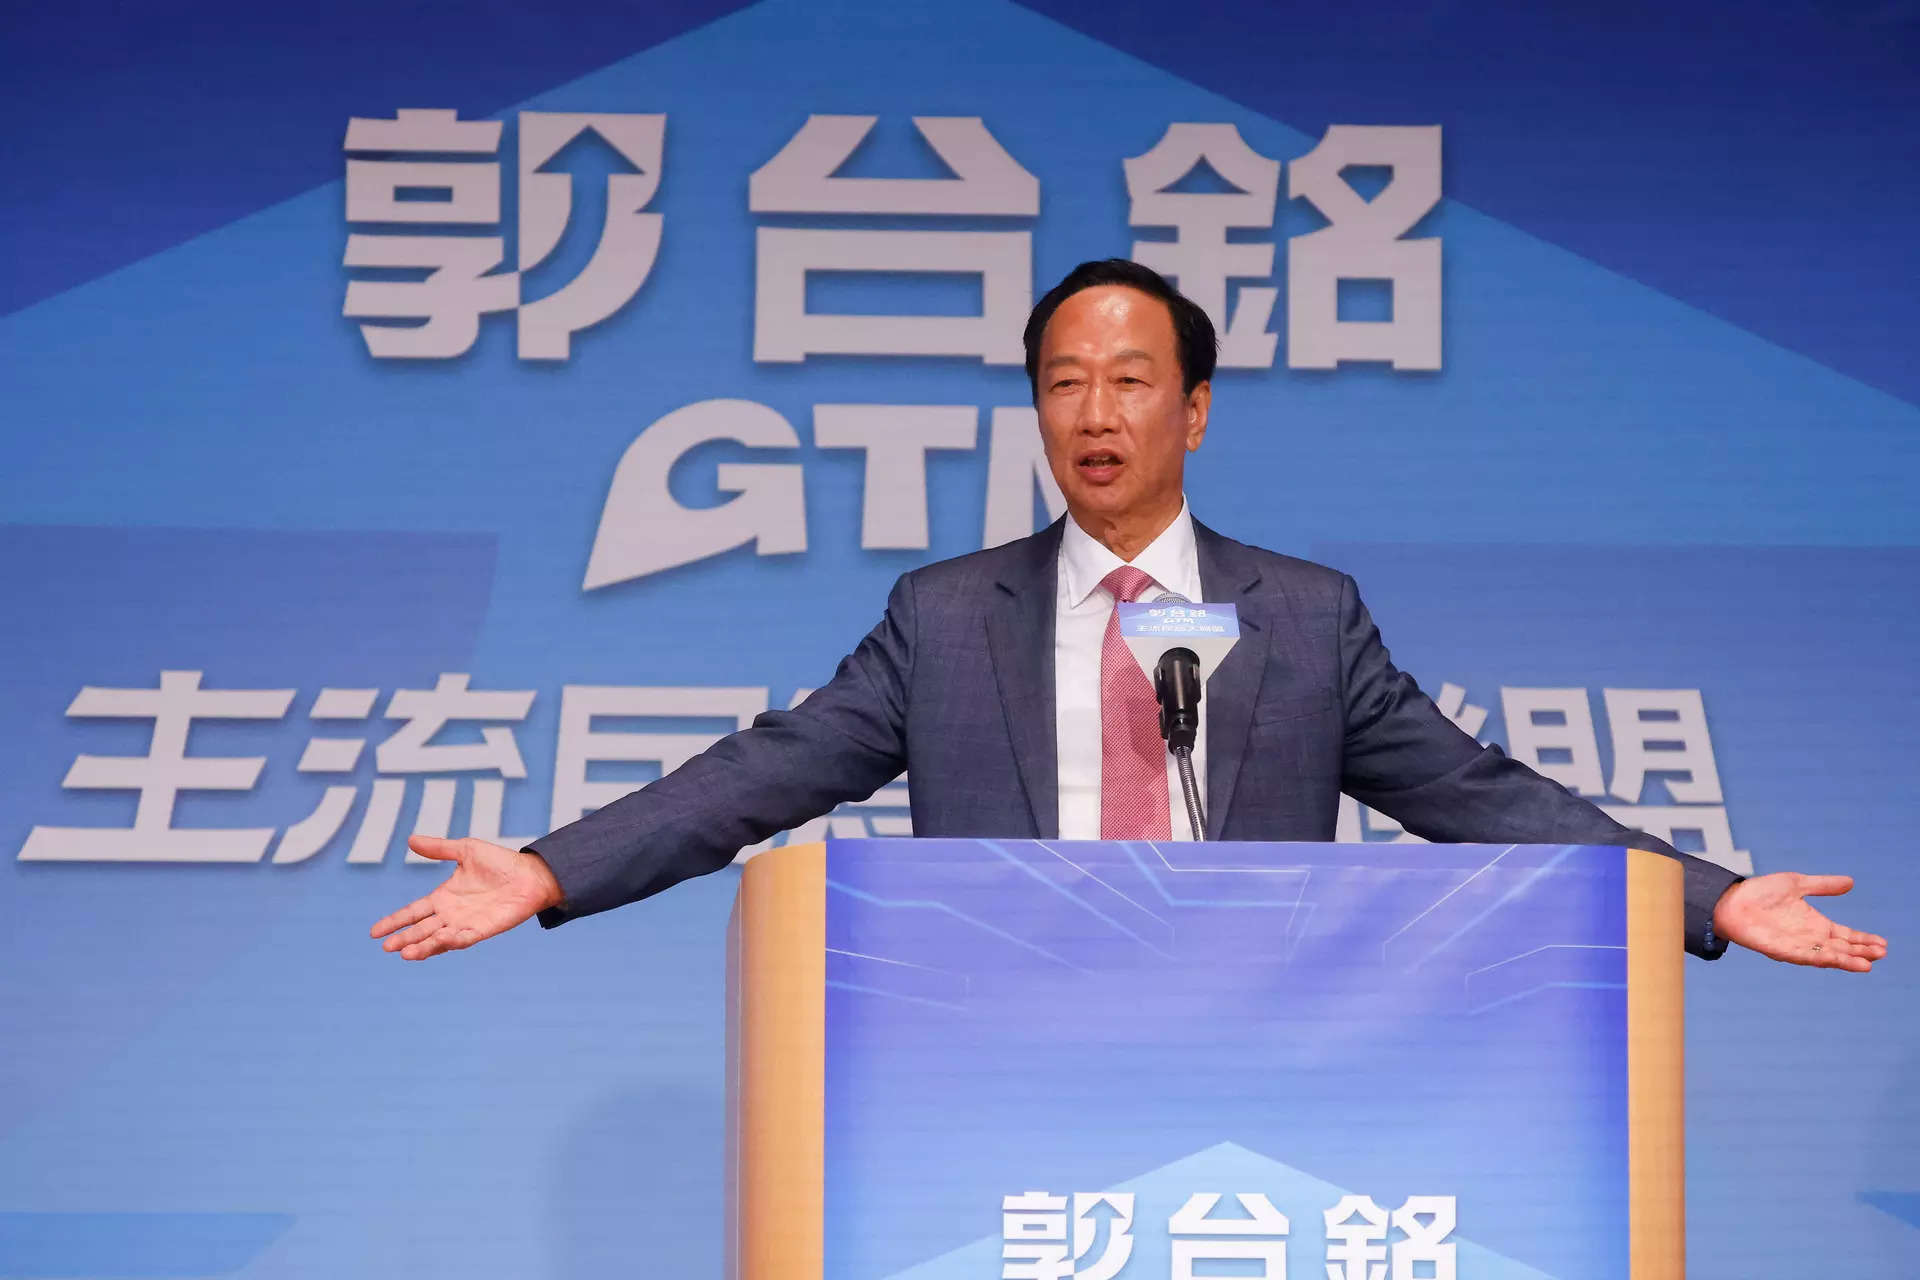 Foxconn founder Terry Gou makes first high-profile appearance in months 